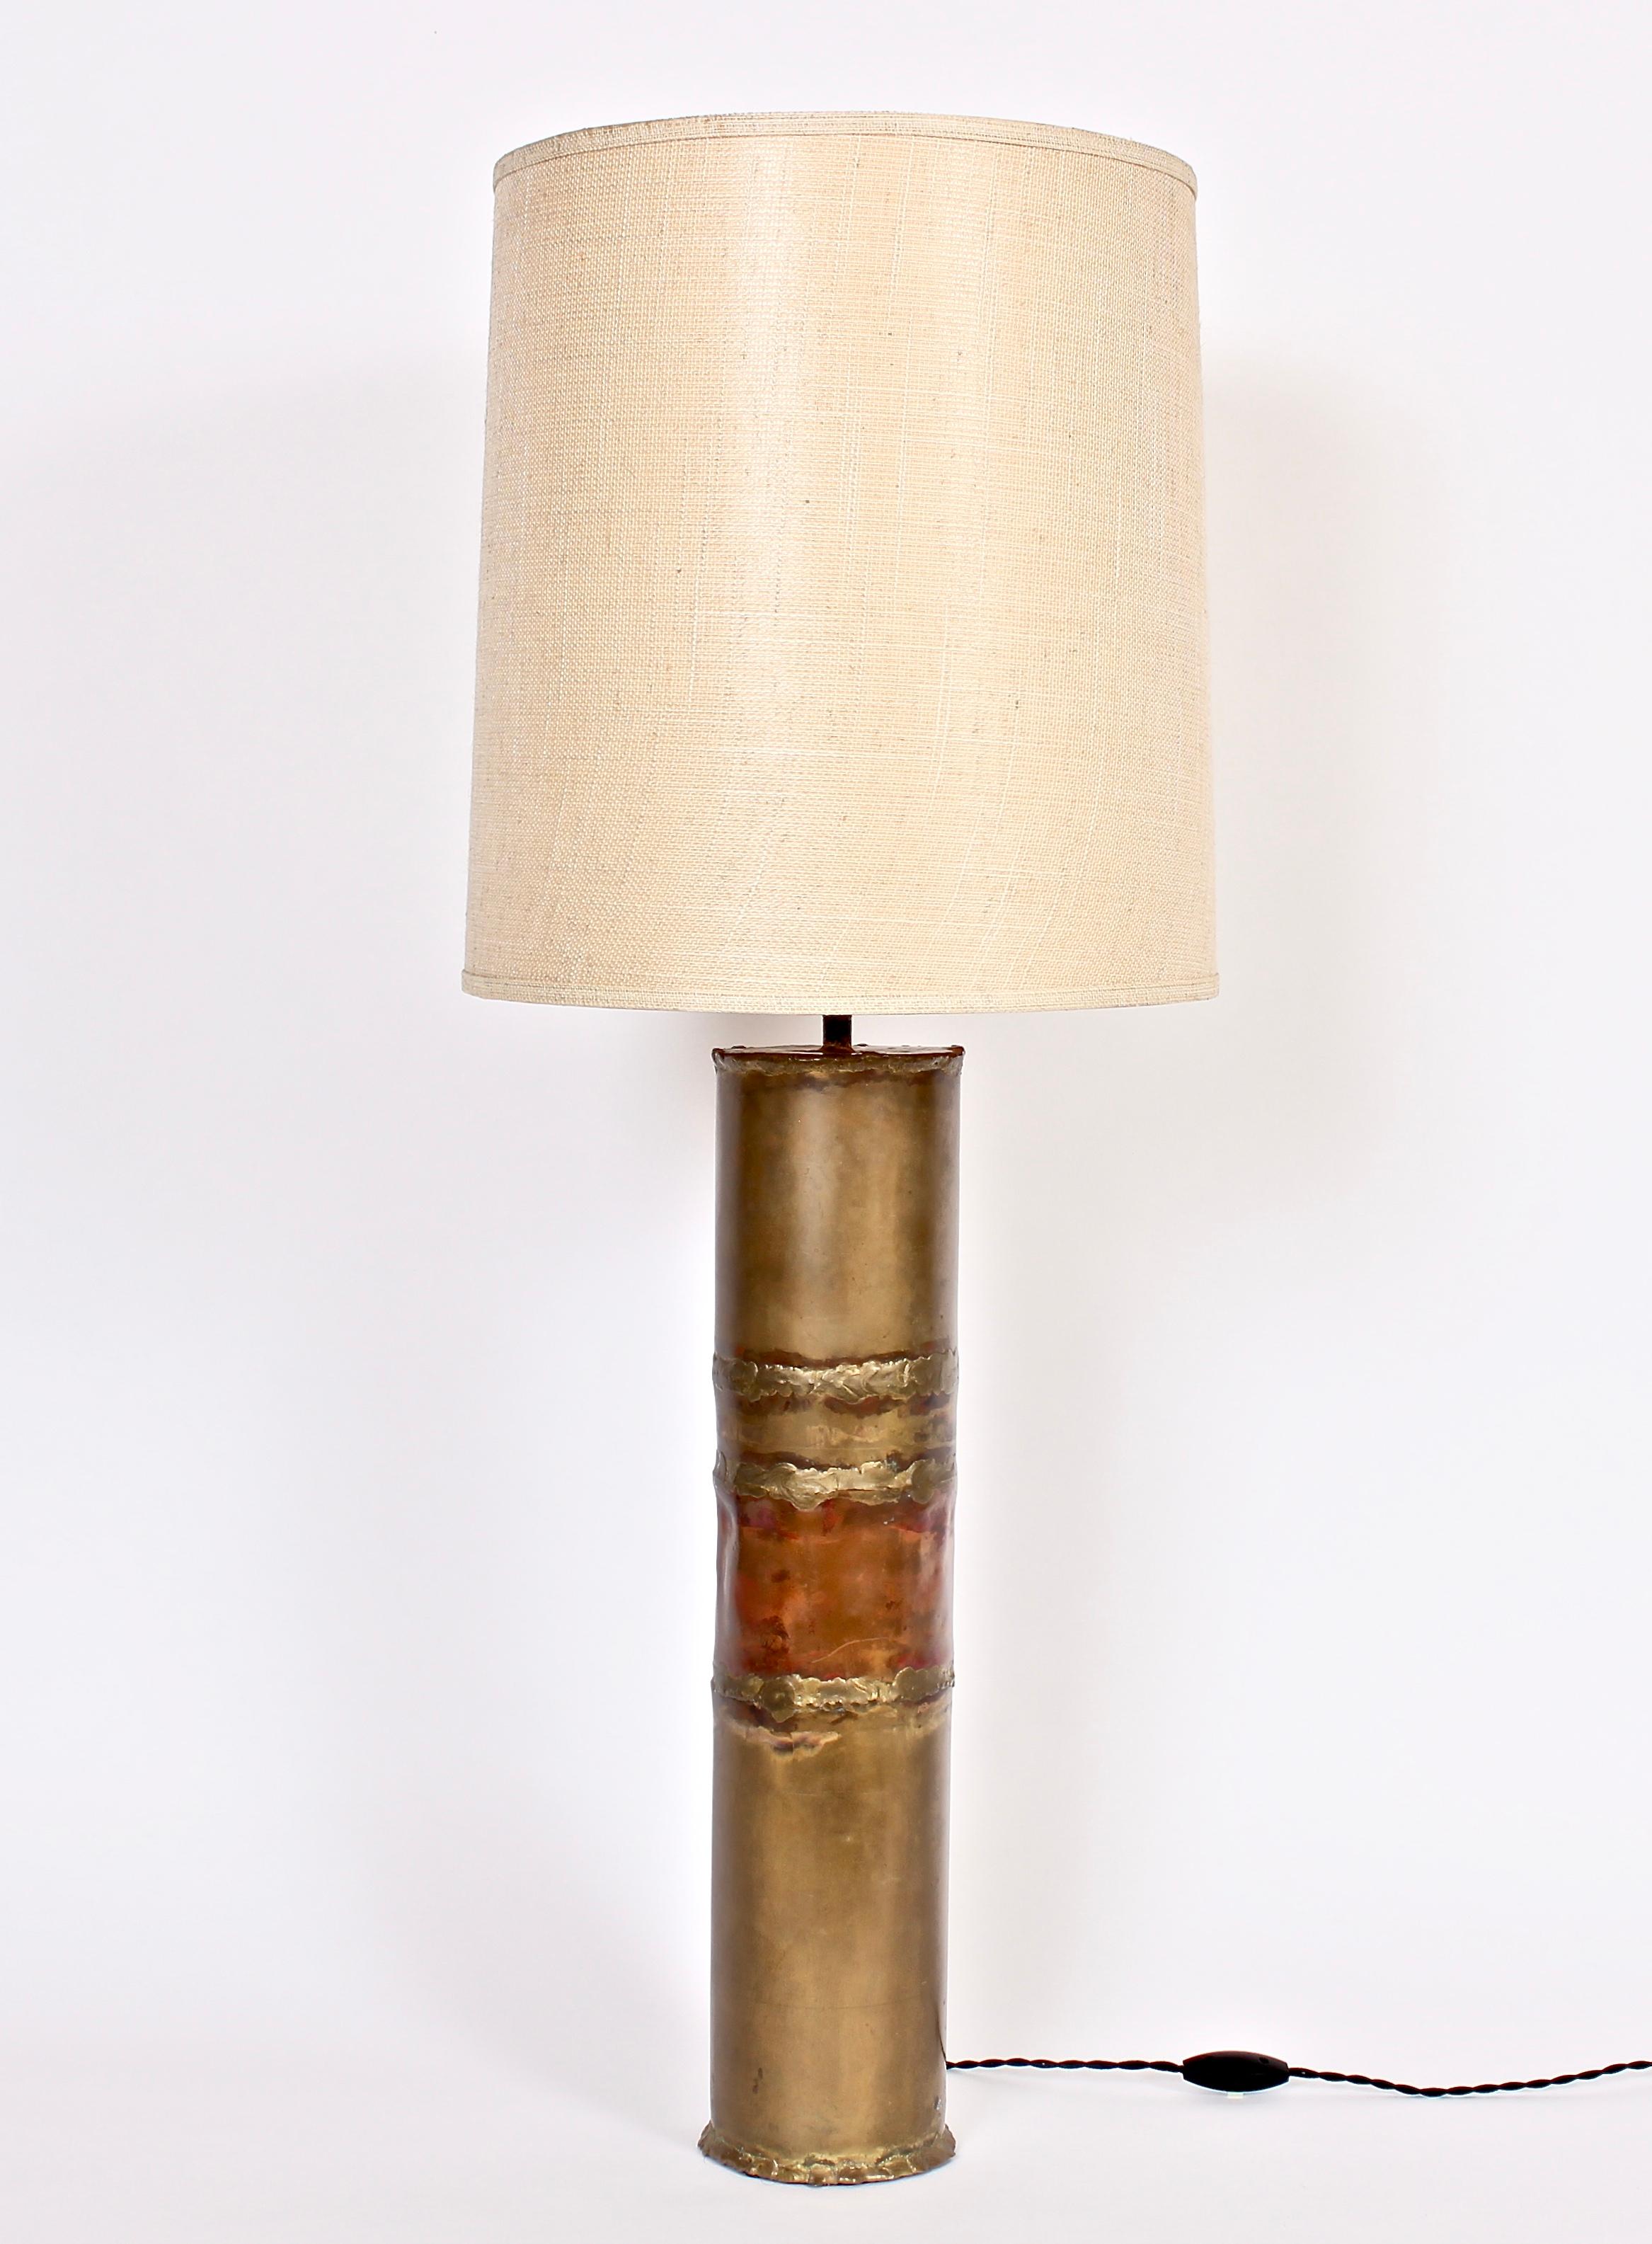 Substantial Silas Seandel Torched Mixed Metal Brutalist Table Lamp, 1974 For Sale 5